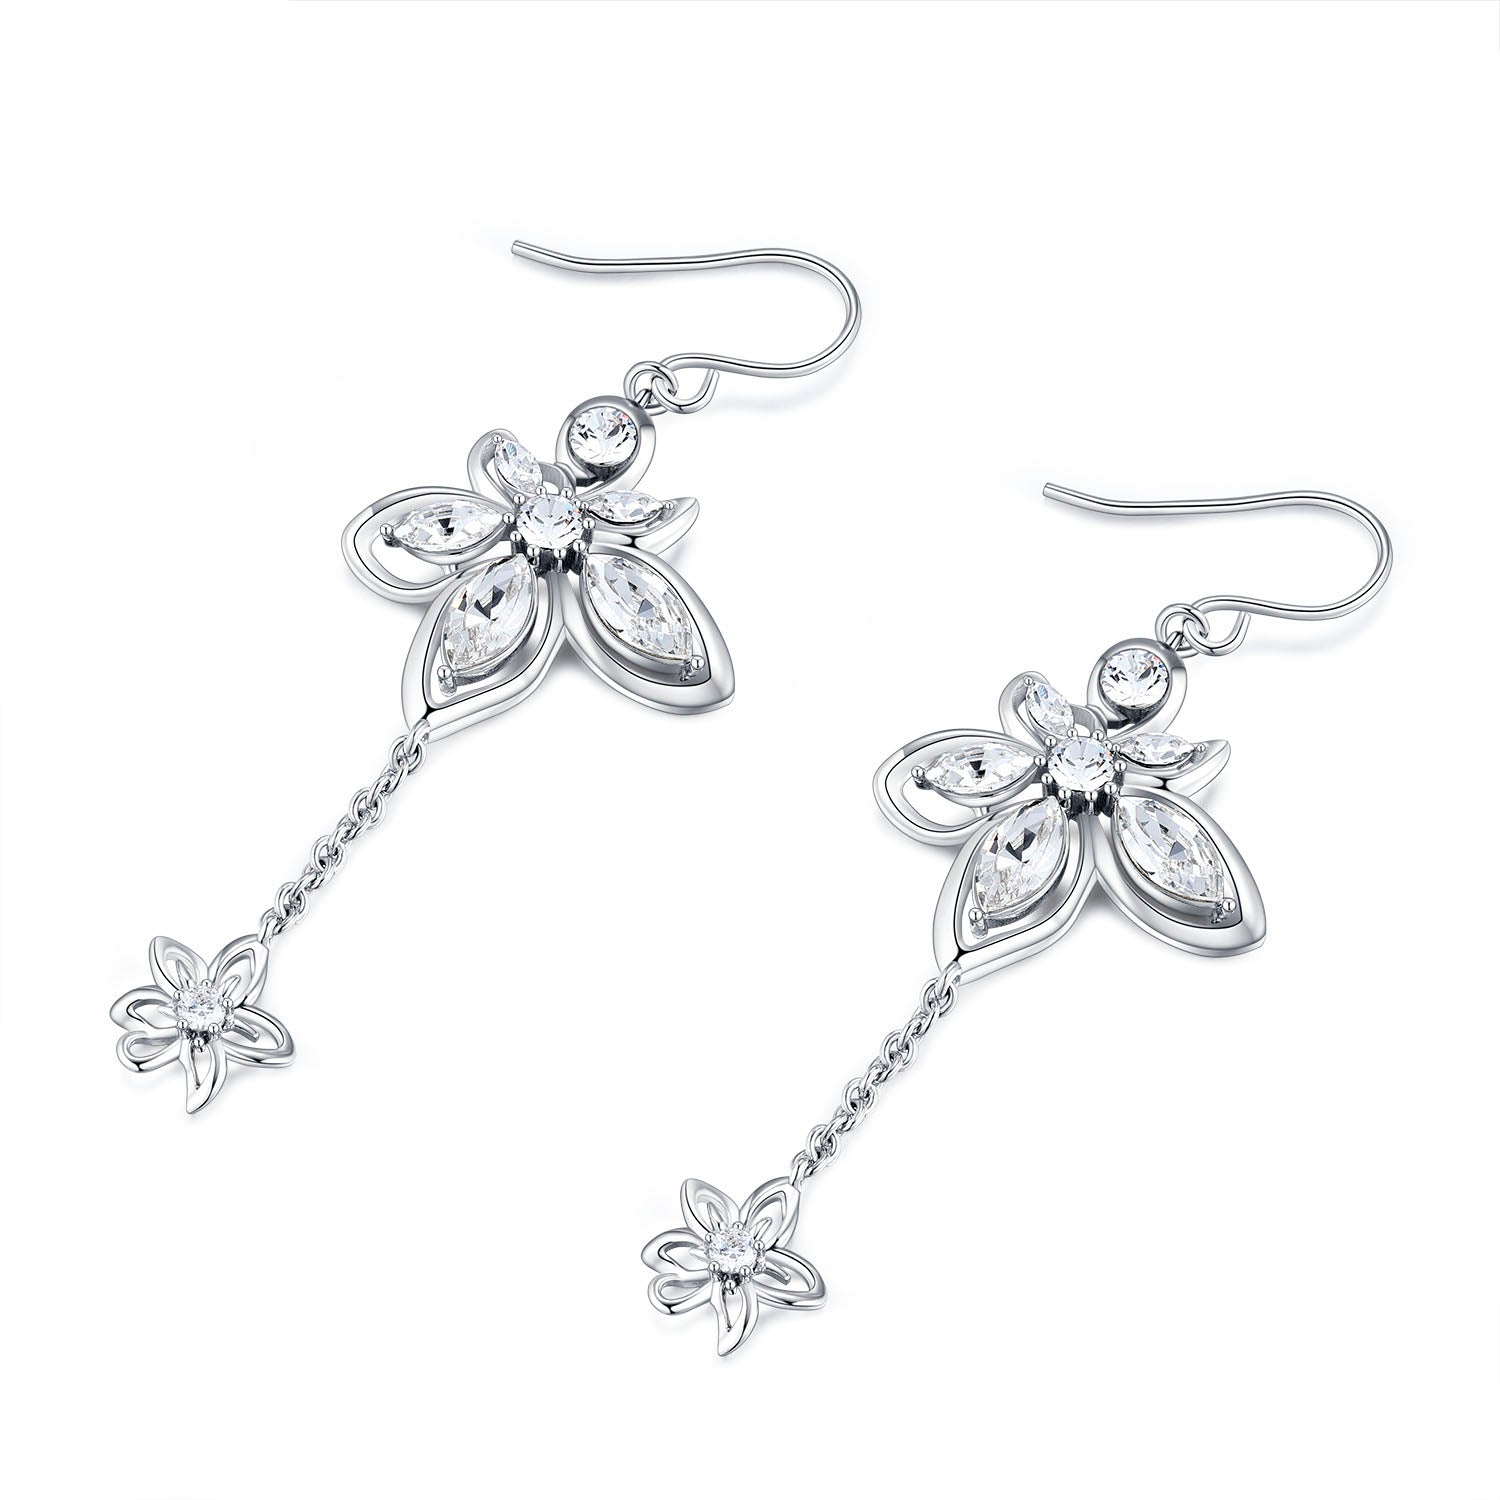 Vicacci 925 Silver Bauhinia Flower Earrings with Swarovski Crystals